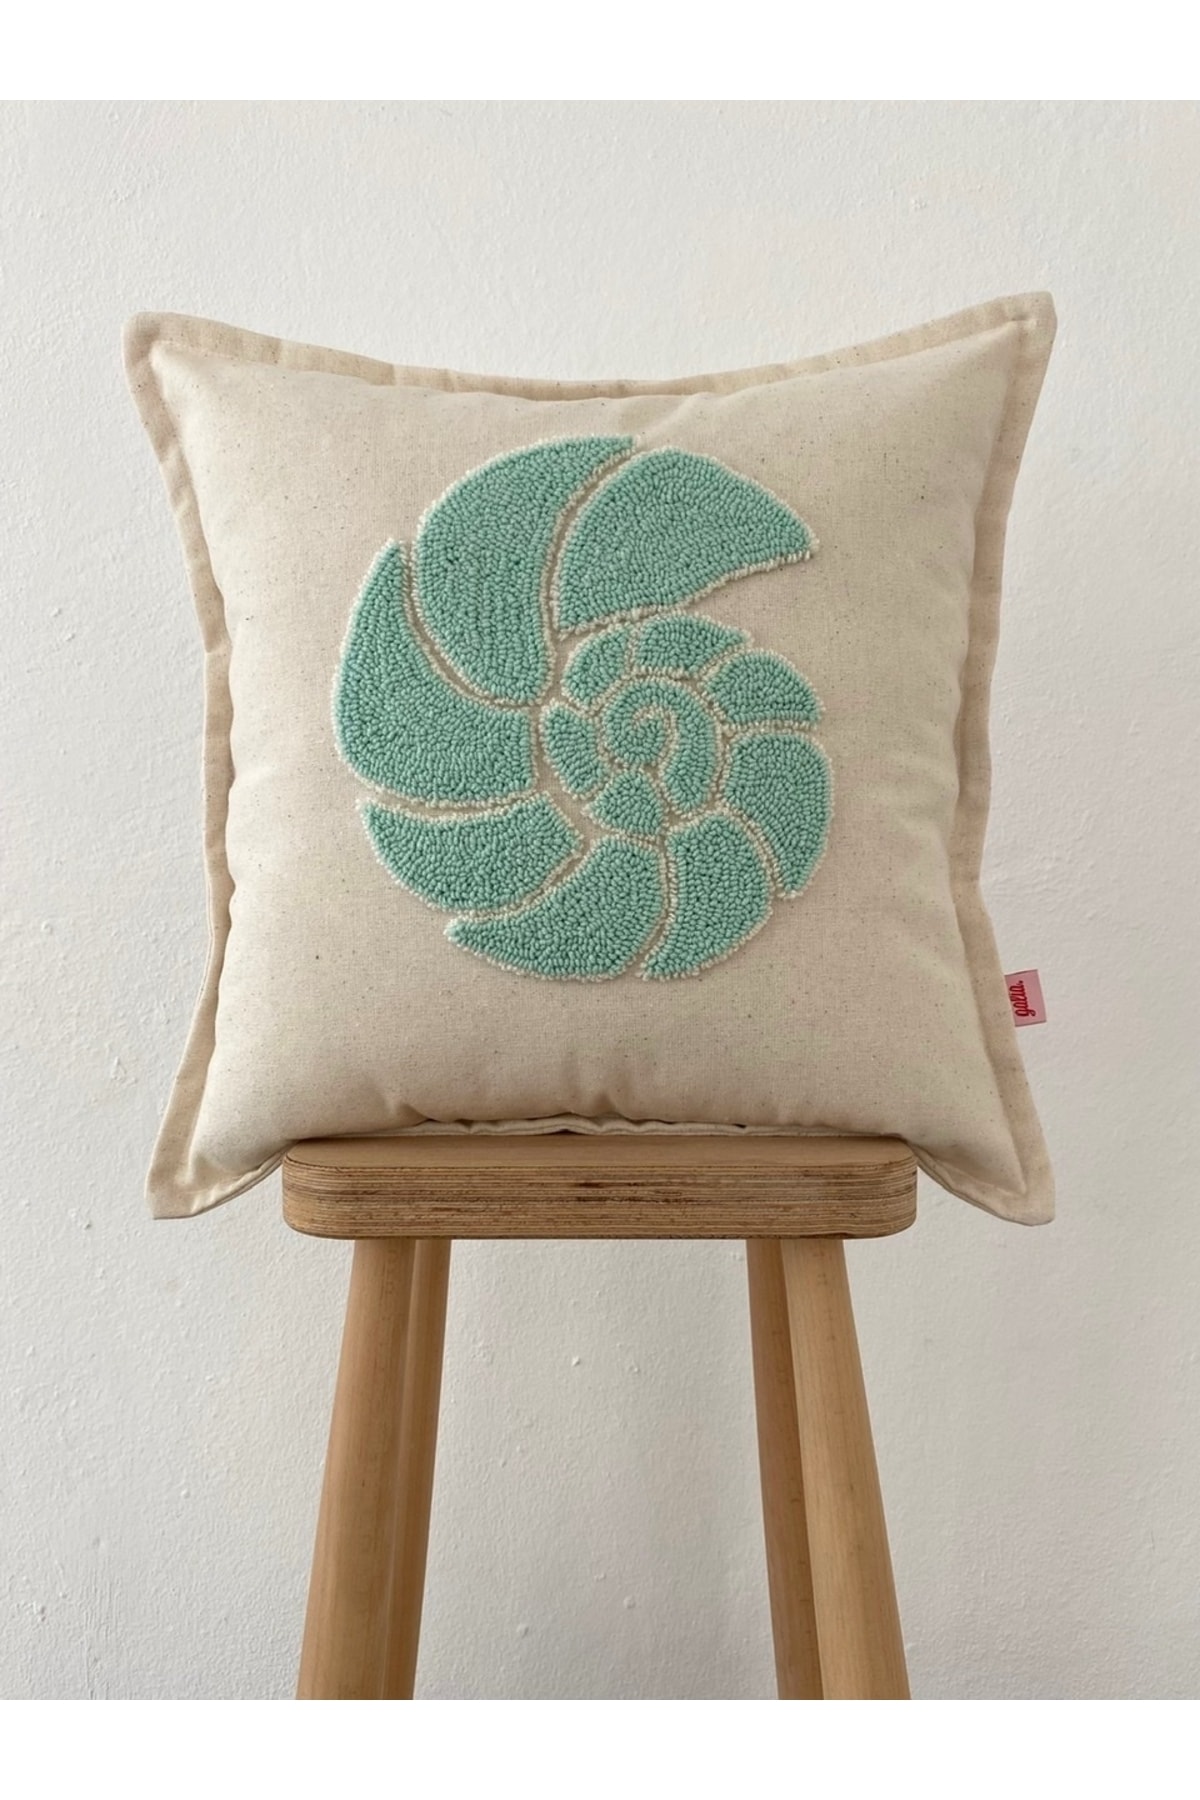 Marine Series Seashell Washed Linen Punch Cushion Pillow Cover